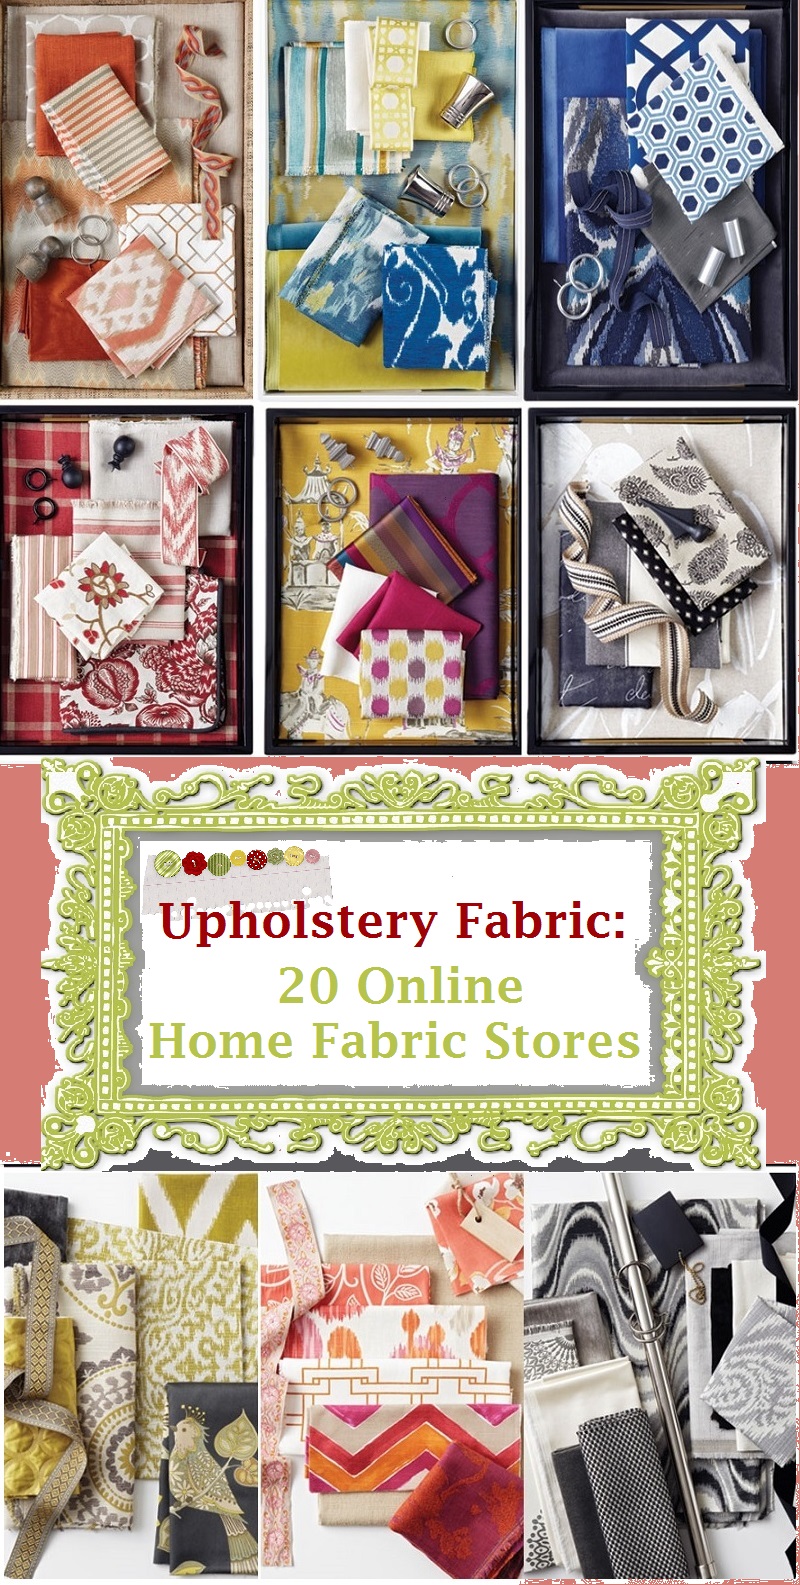 upholestery-fabric-online-stores.jpg